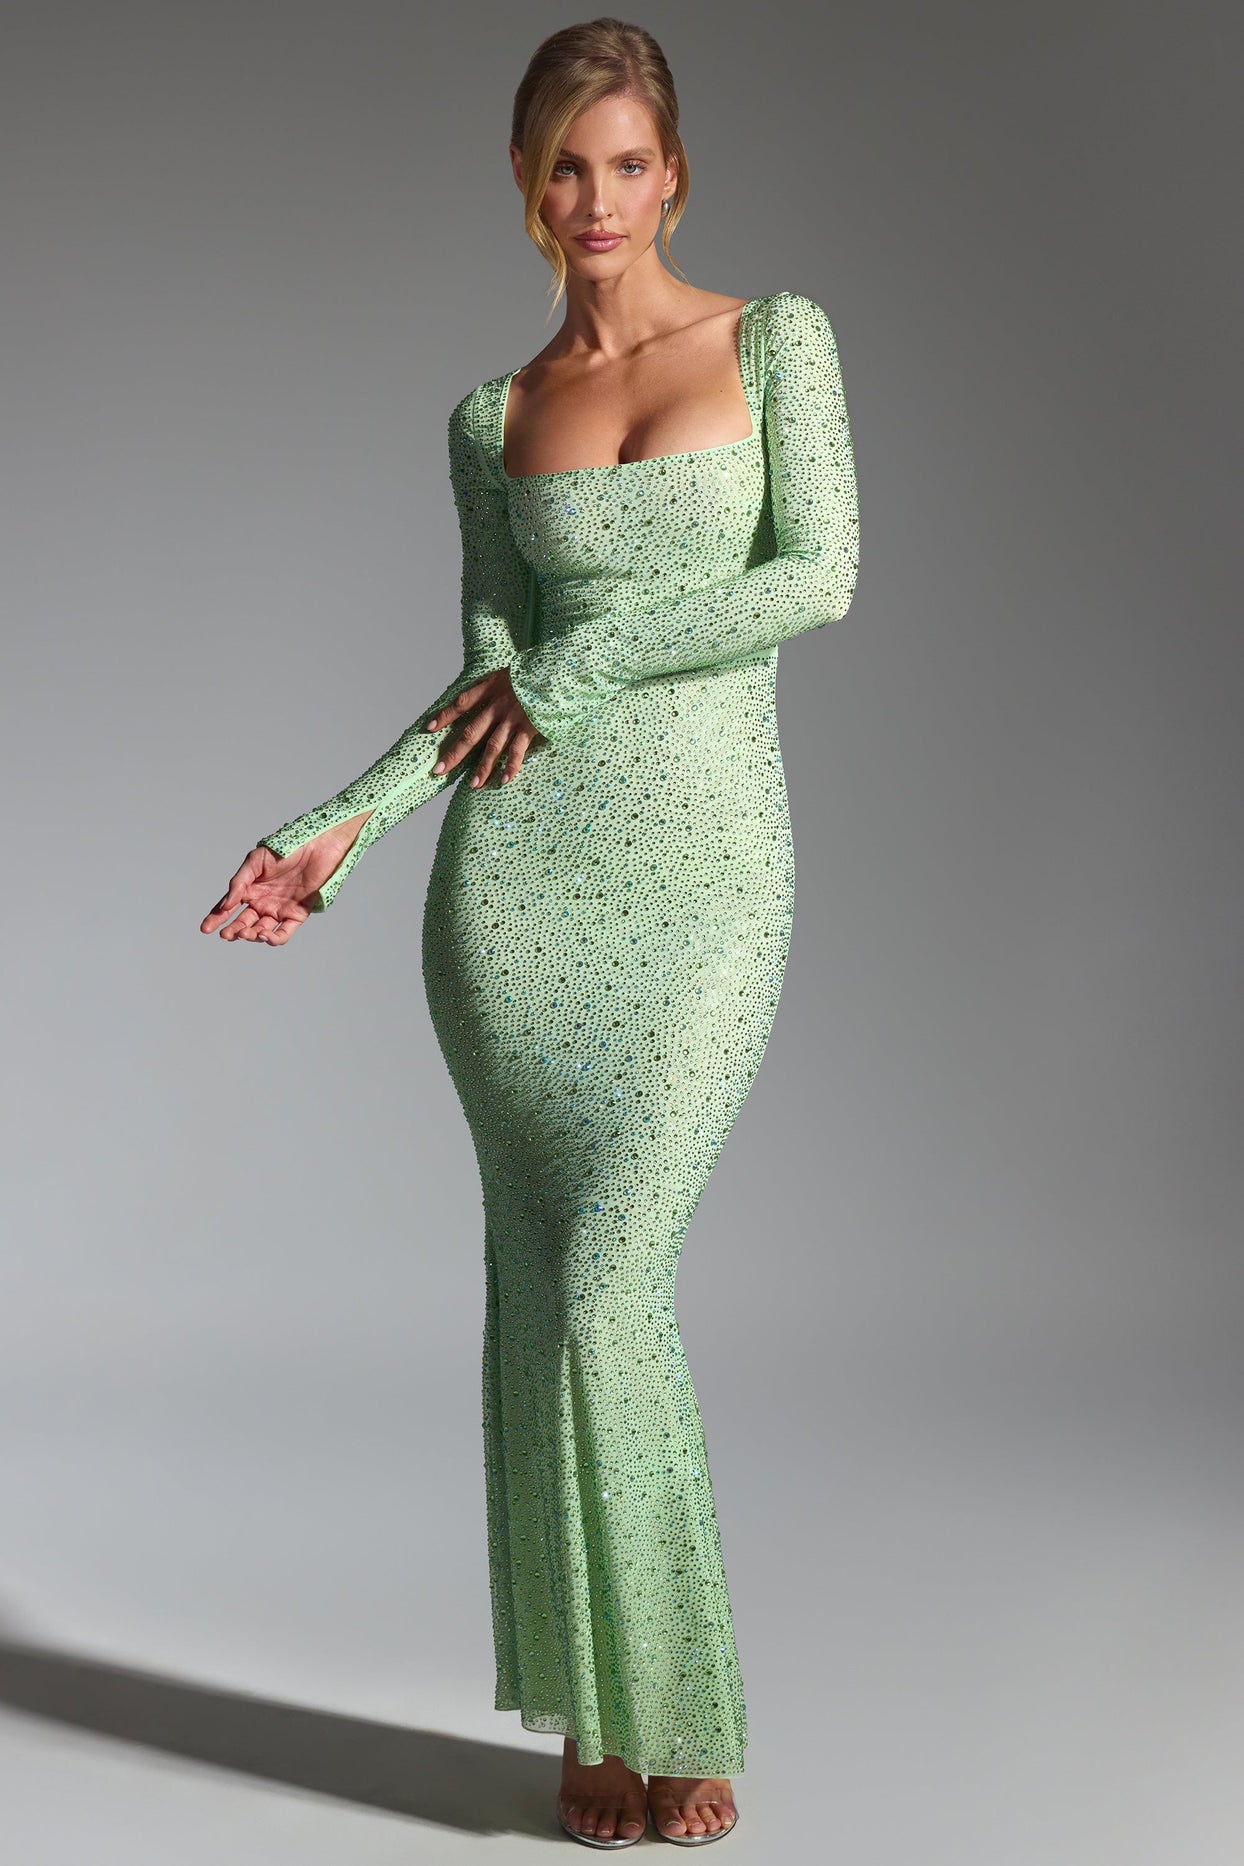 Embellished Fishtail Maxi Dress in Pistachio